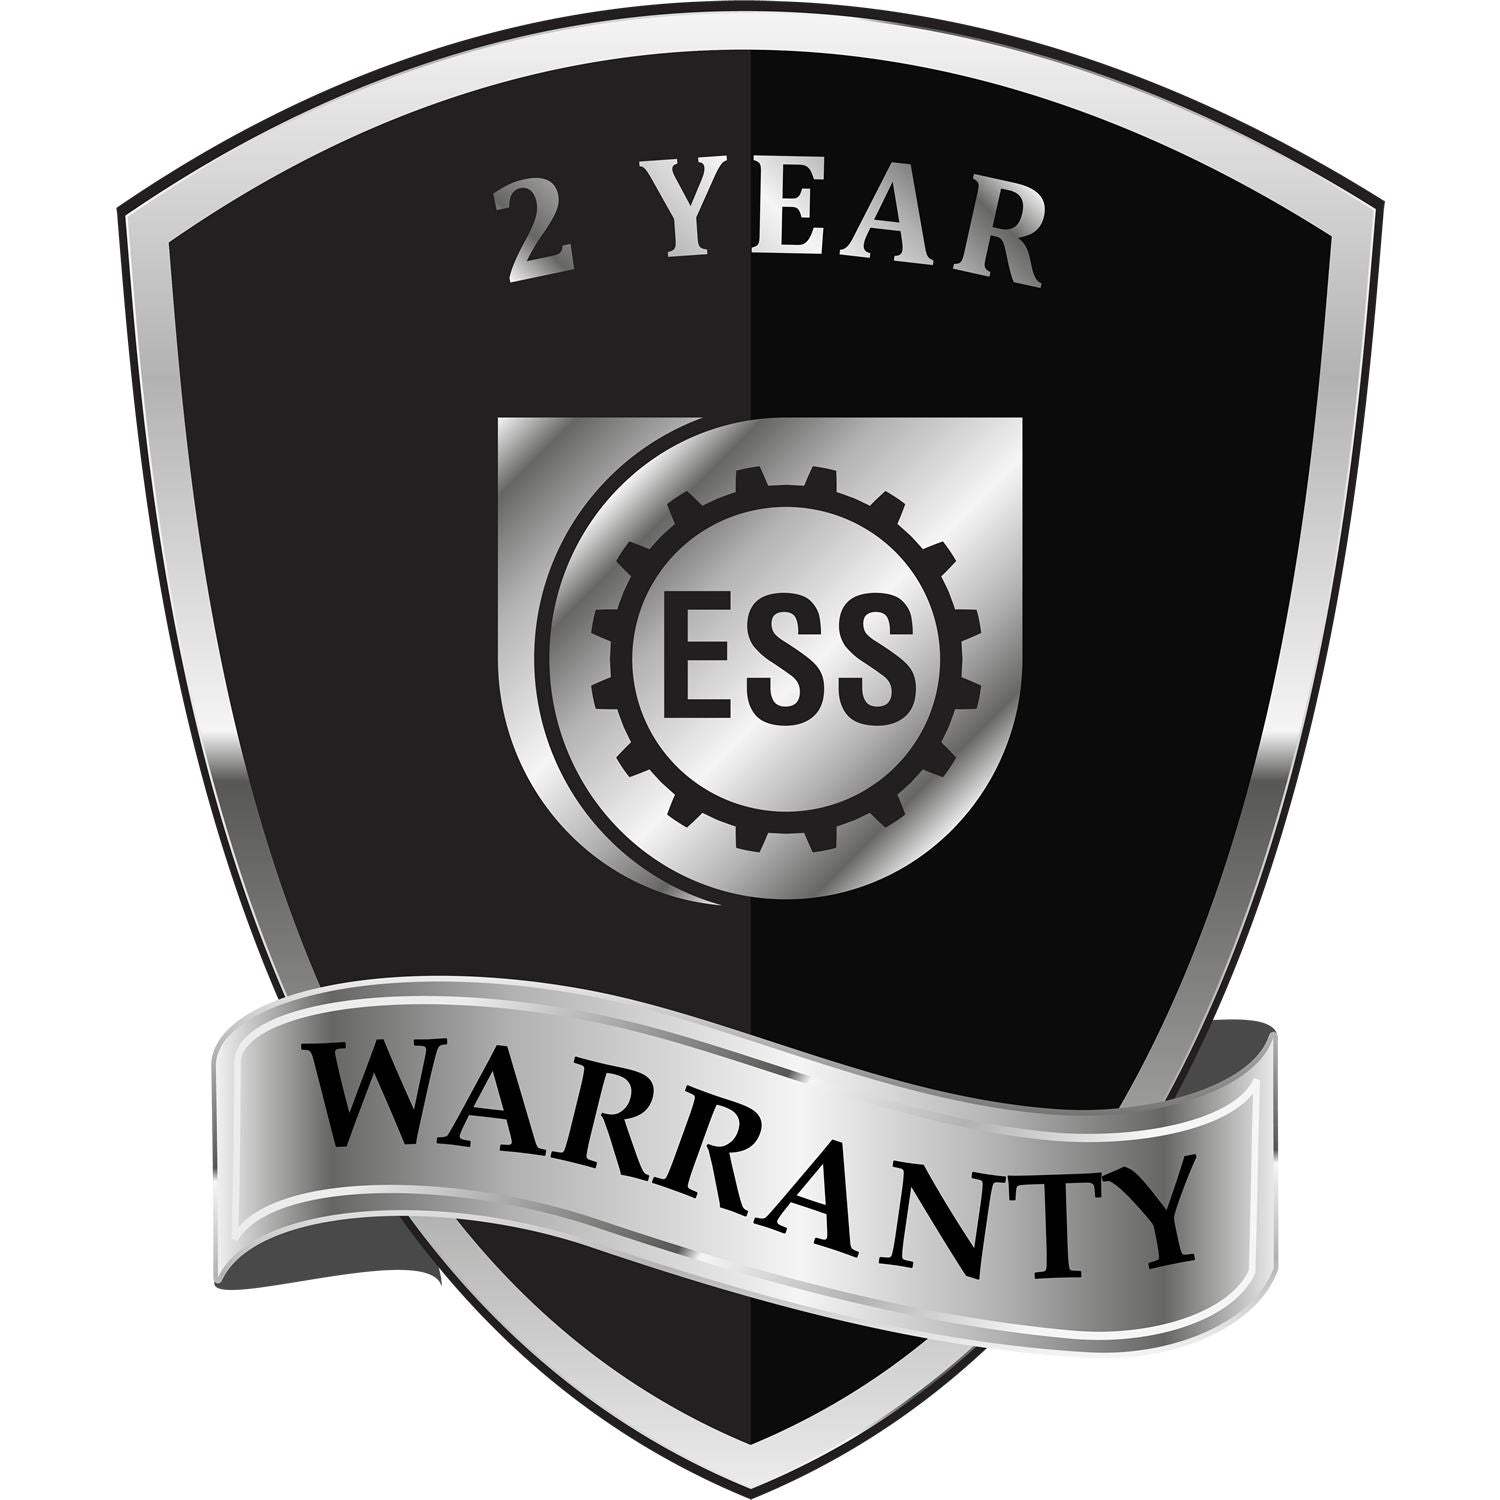 A badge or emblem showing a warranty icon for the Connecticut Desk Landscape Architectural Seal Embosser